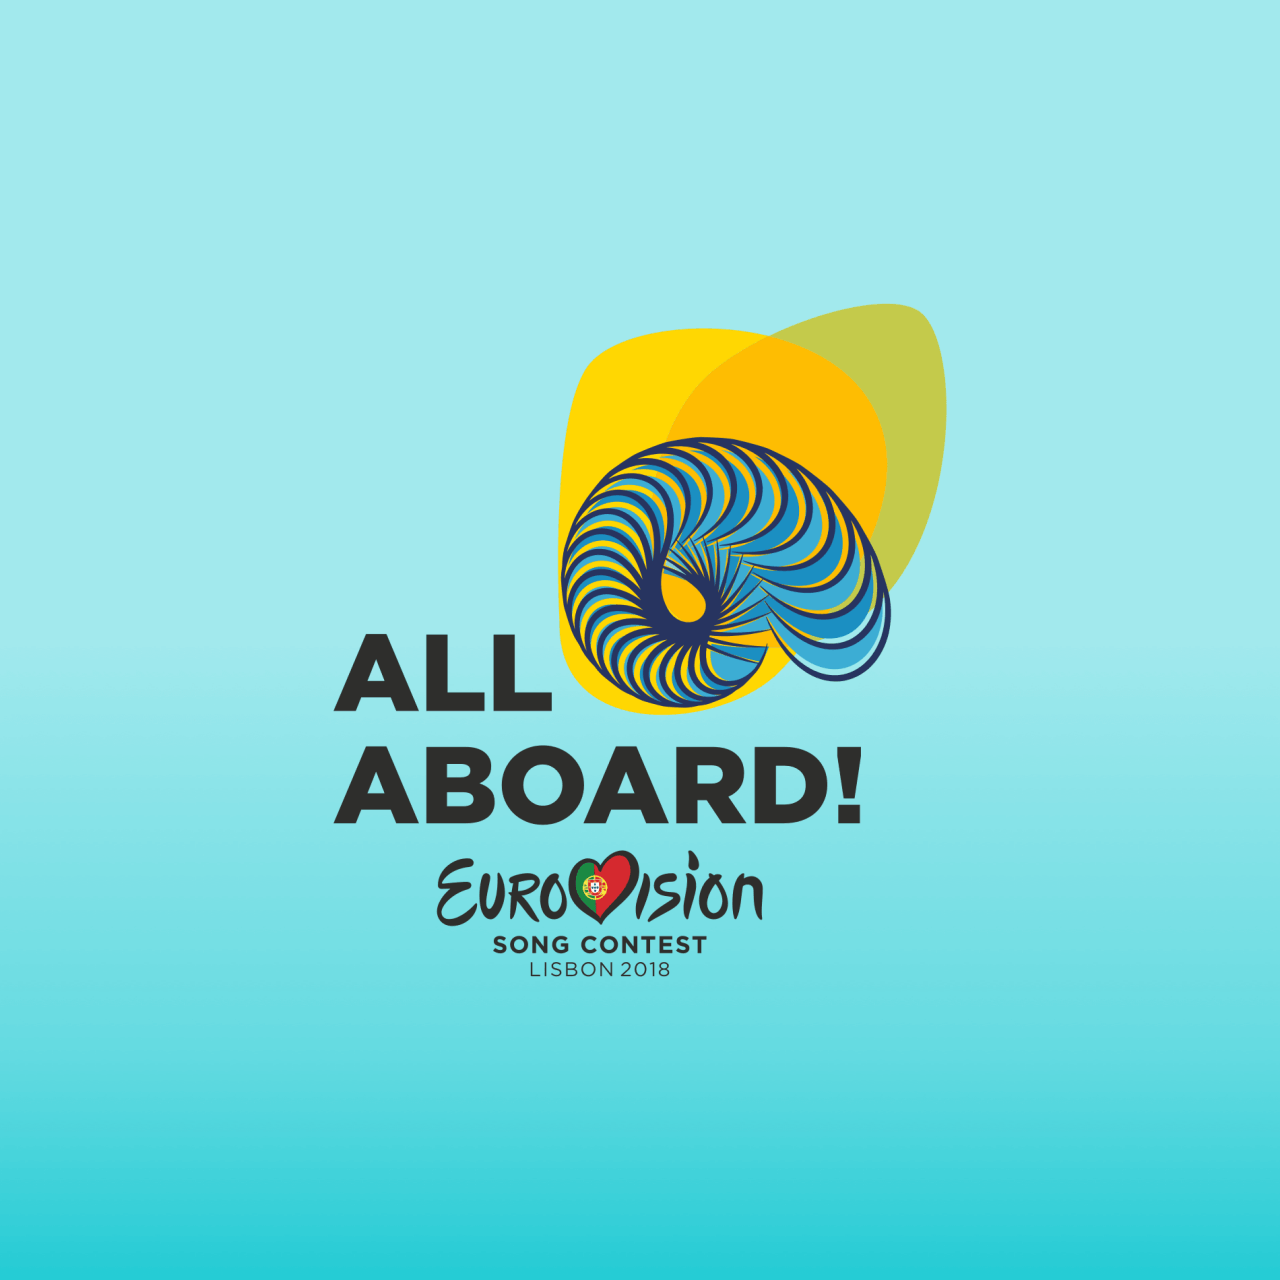 All Aboard! Lisbon welcomes 42 countries to Eurovision 2018. Songs